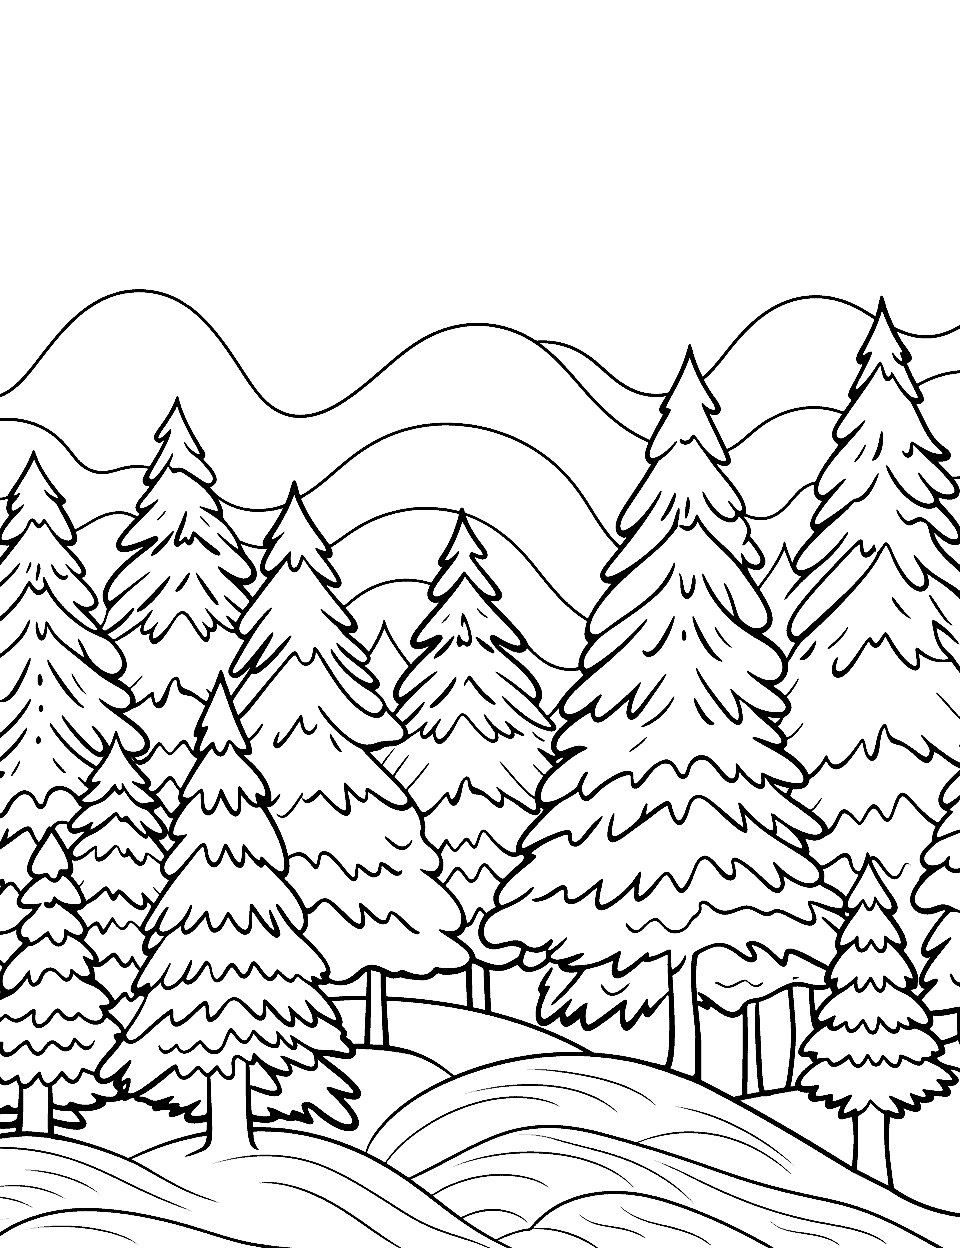 Winter Wonderland Forest Nature Coloring Page - A forest winter scene with pine trees covered in snow.